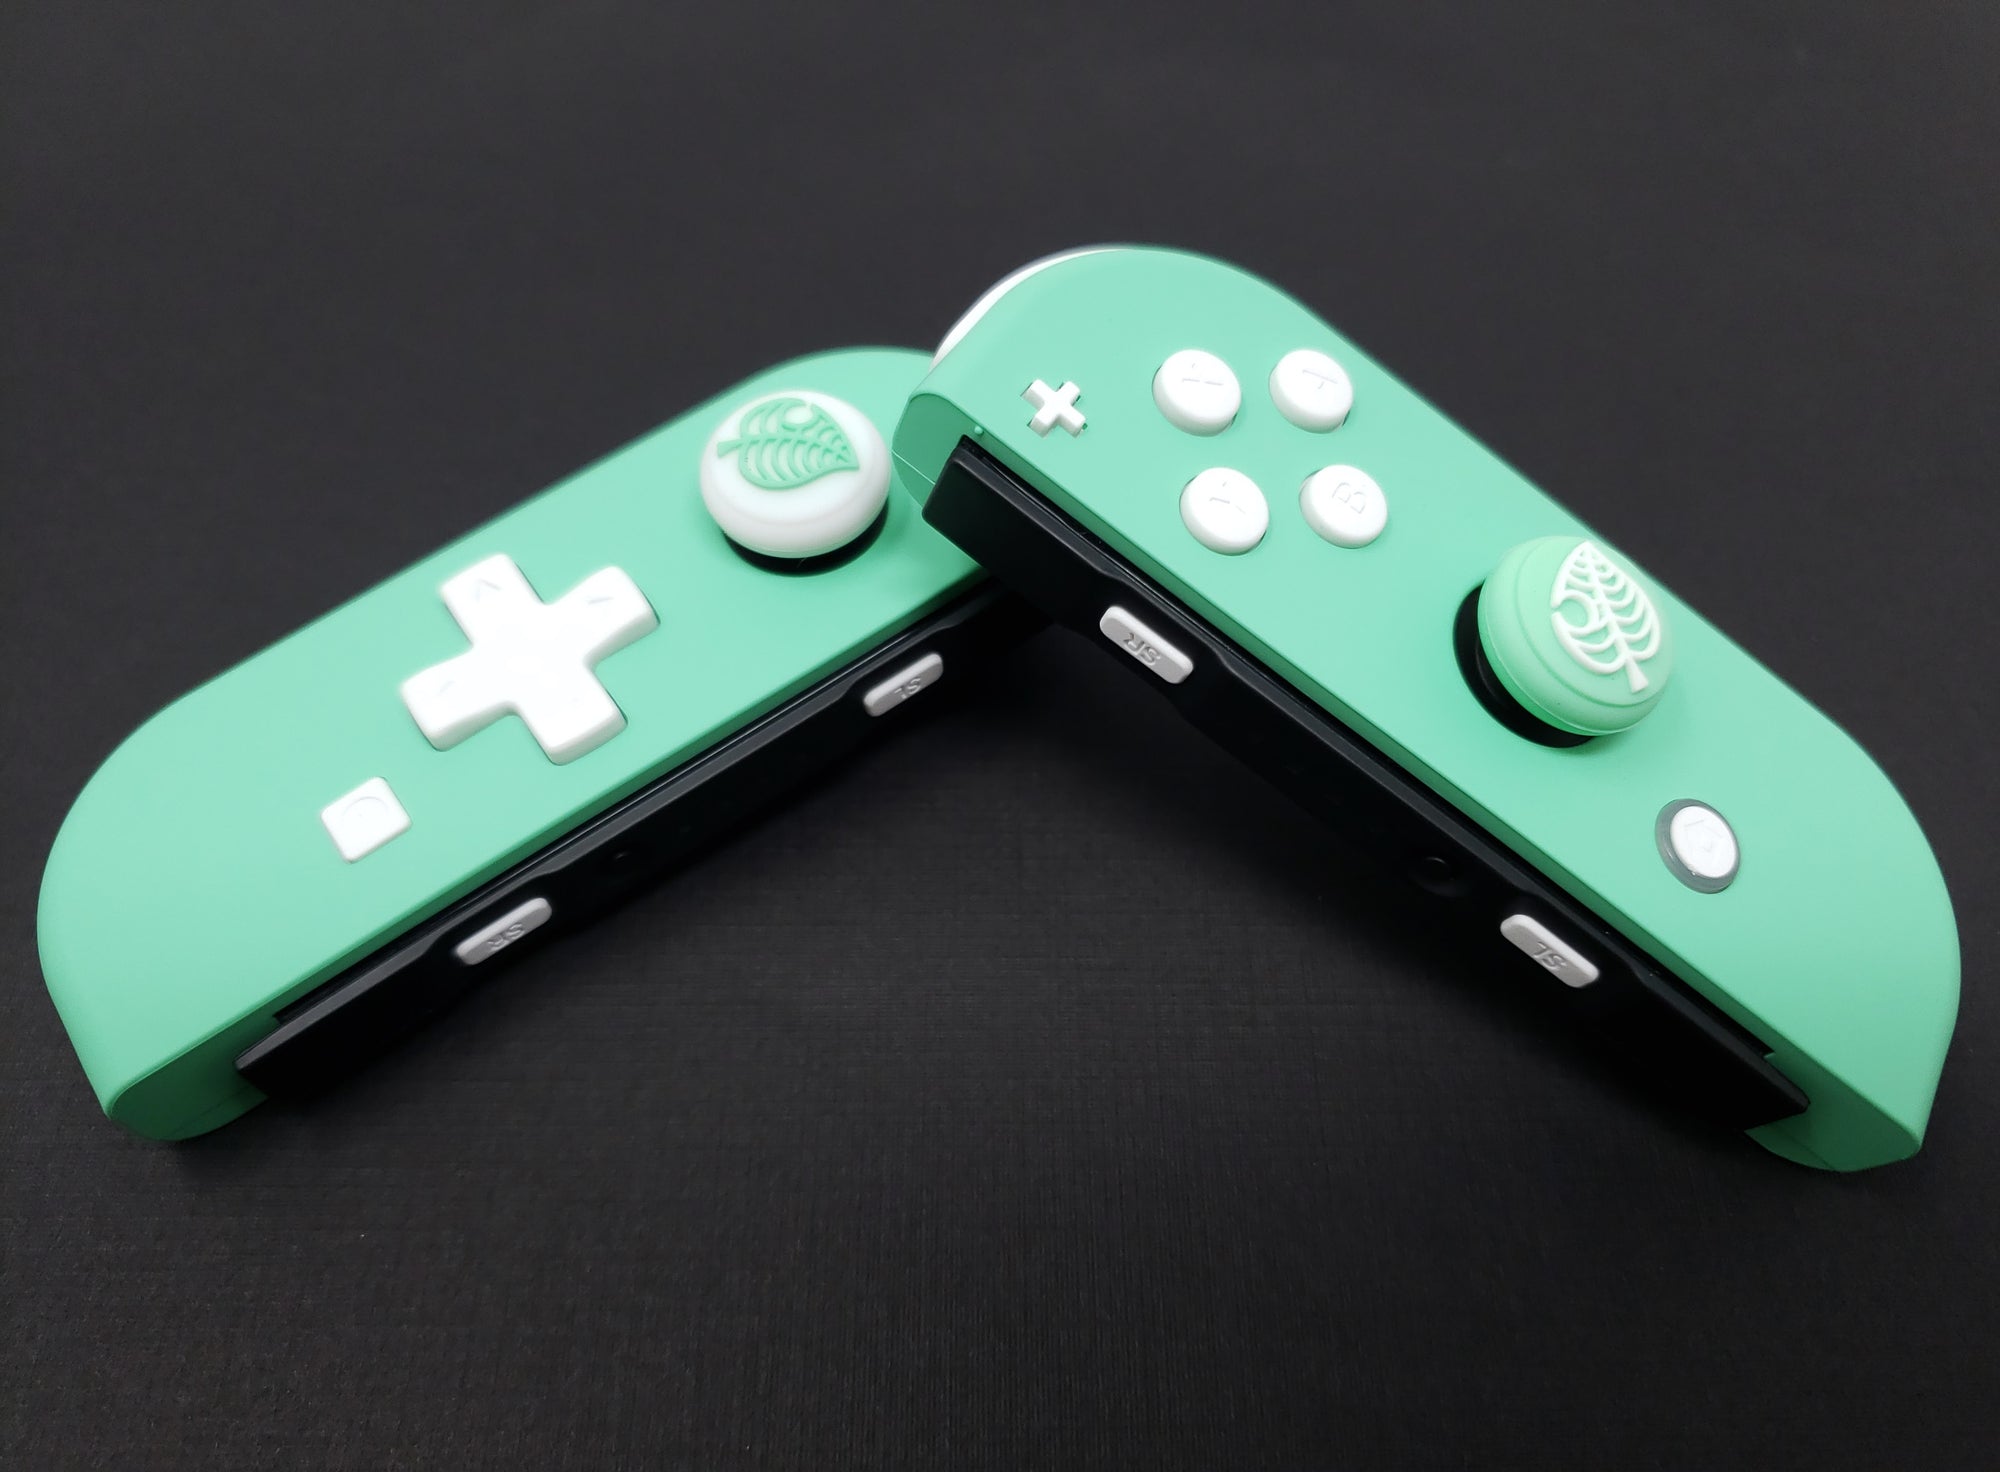 Mint Green Soft Touch - Customizable Options - Official Nintendo Joy-Cons